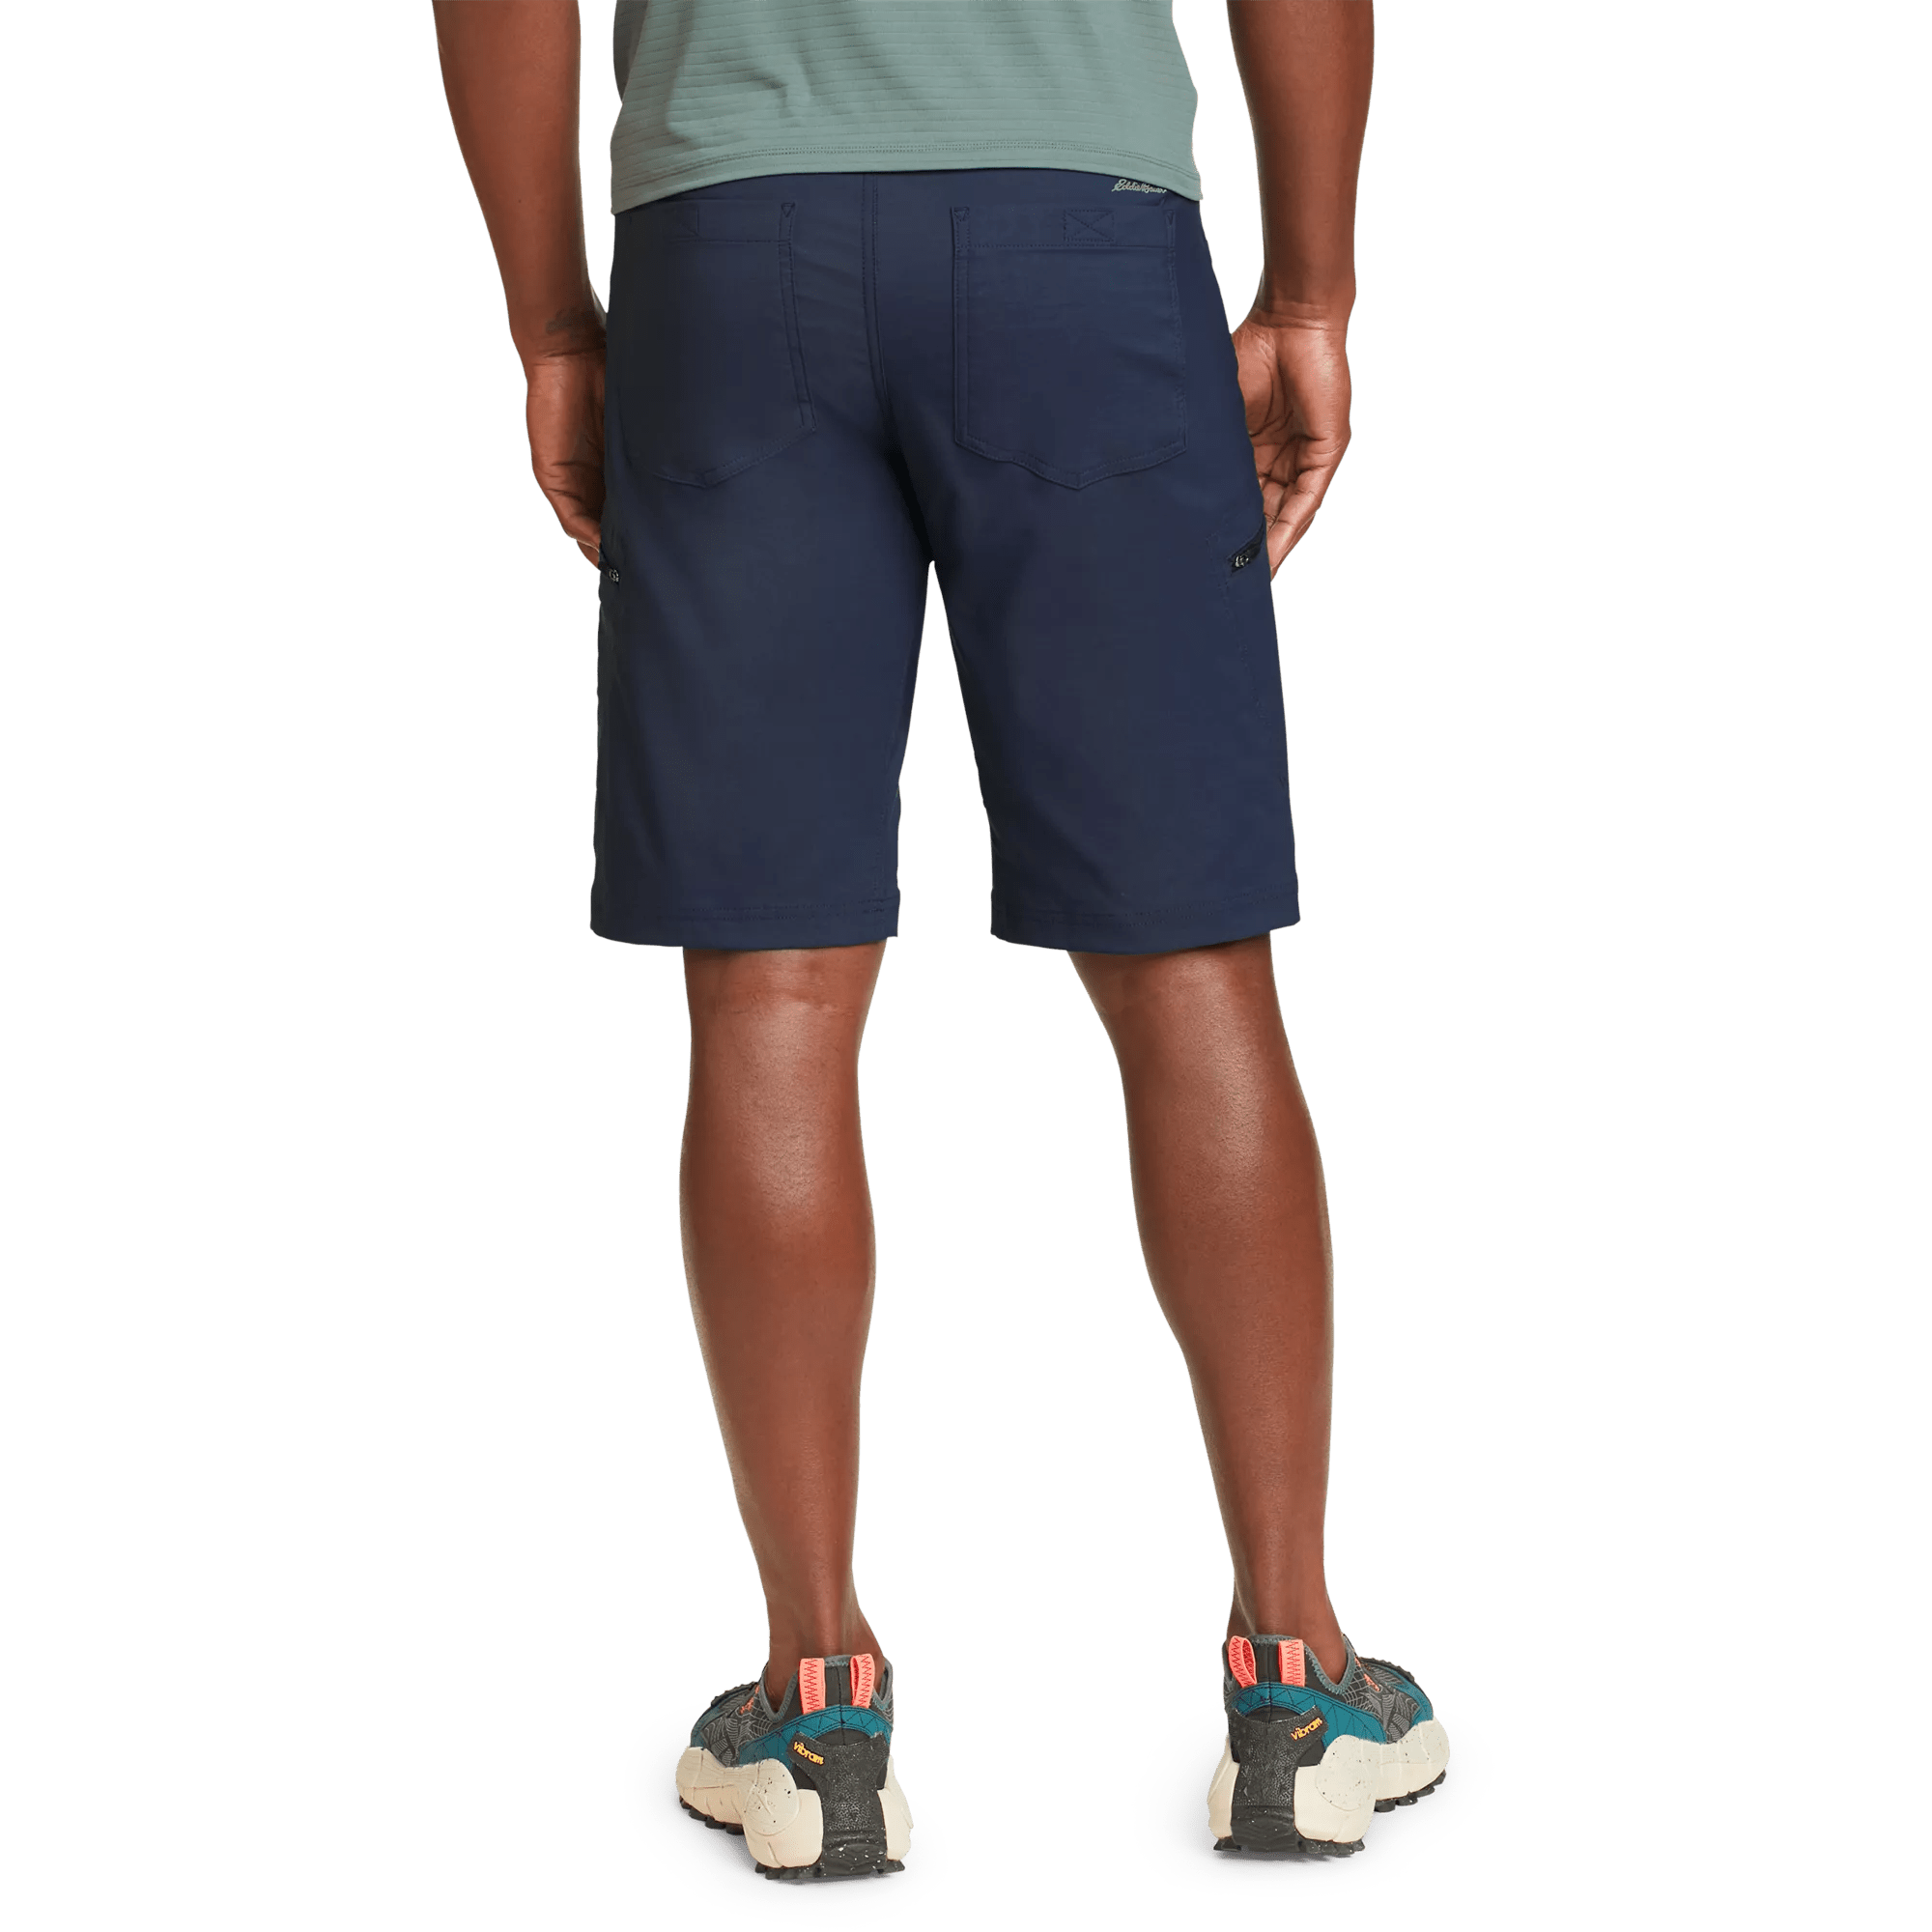 Guide Pro Shorts